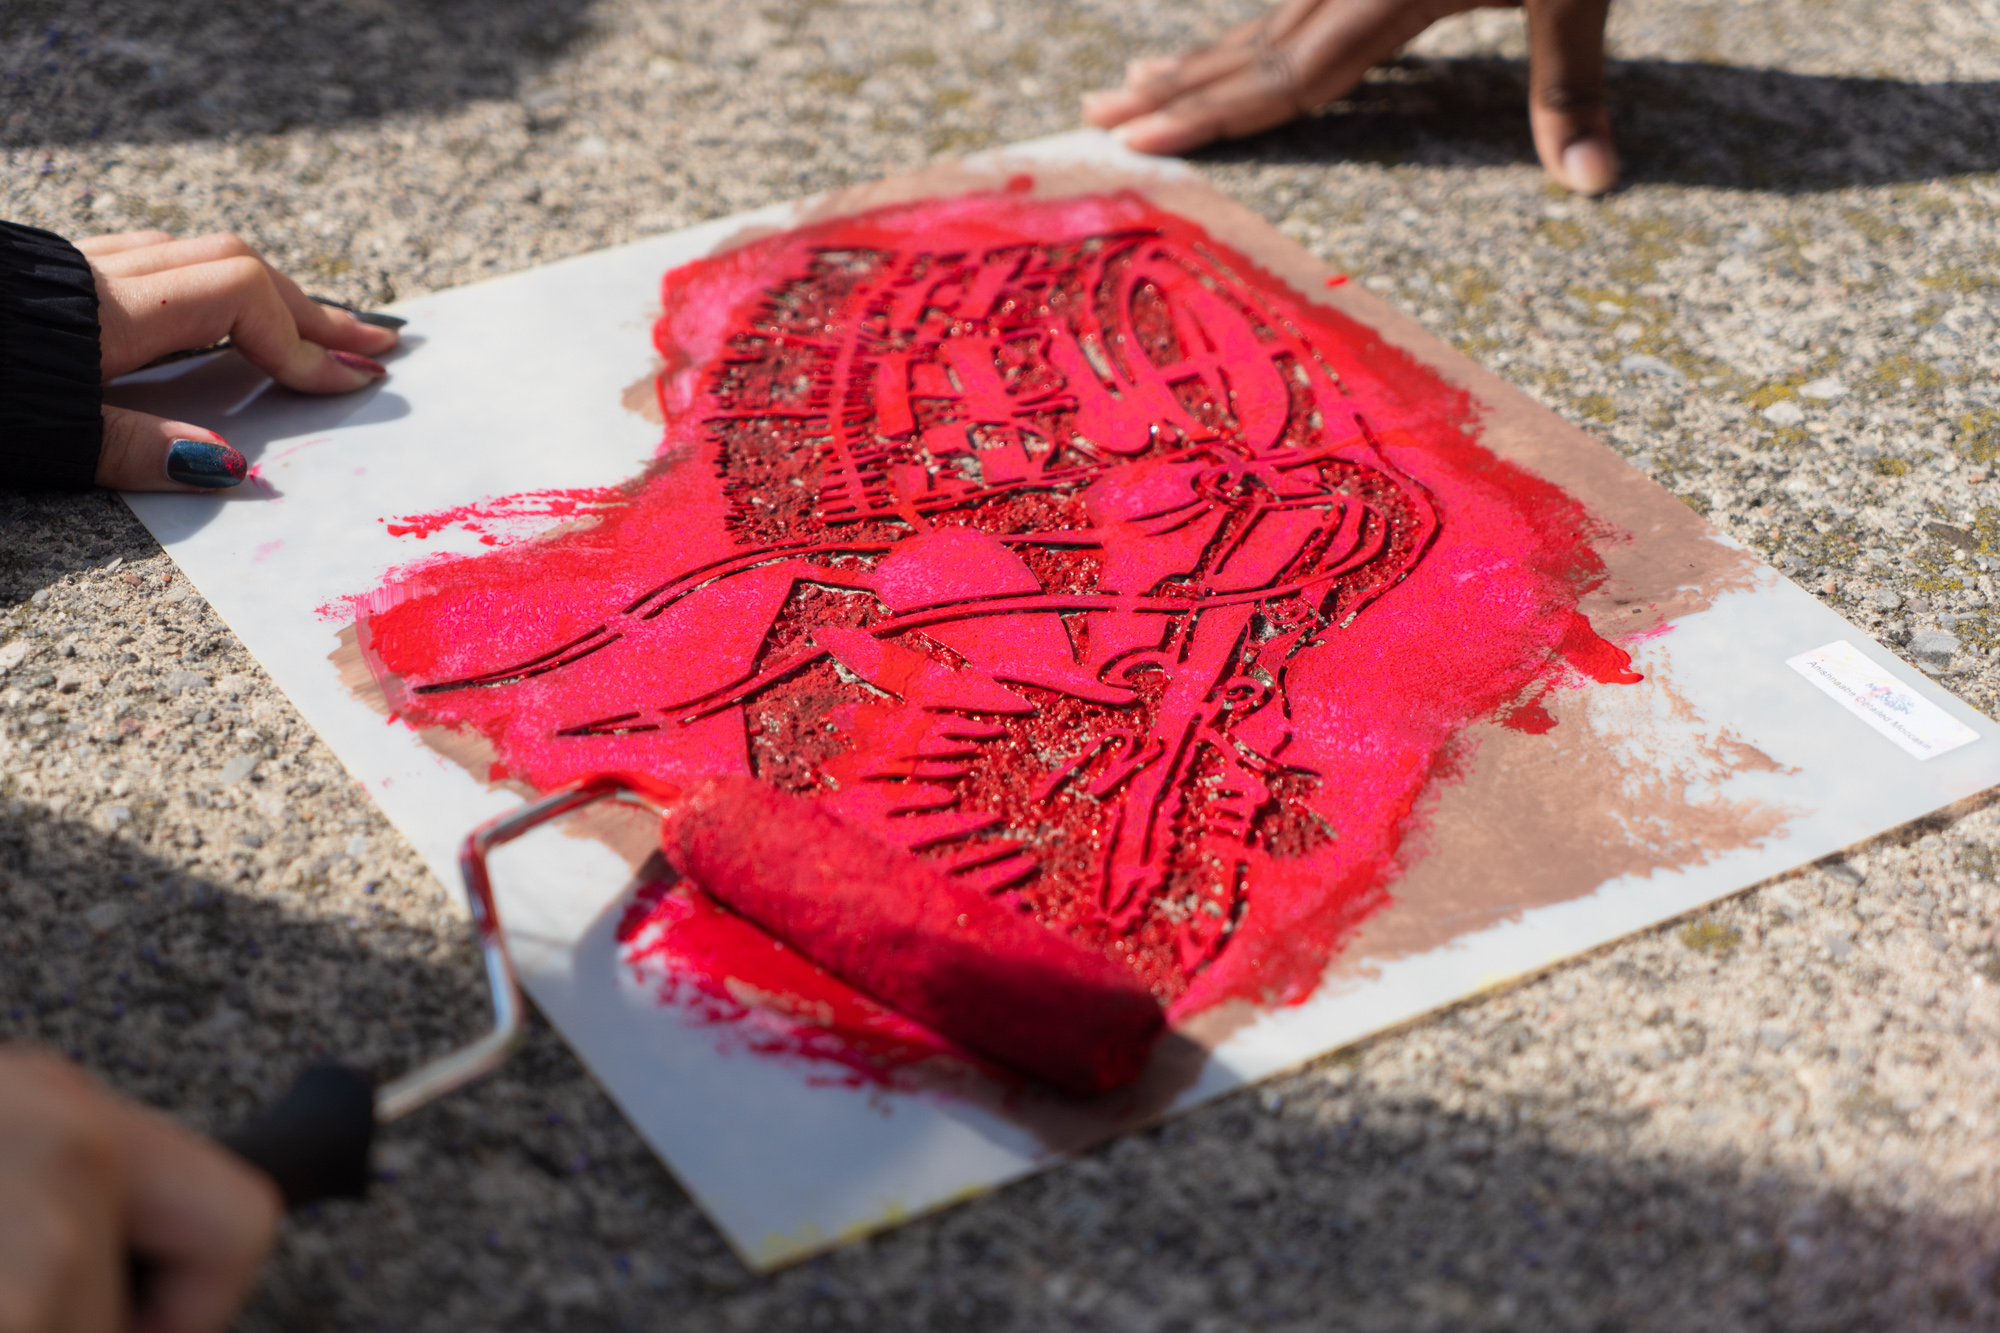 A close up of a moccasin stencil while someone is rolling red paint over the stencil